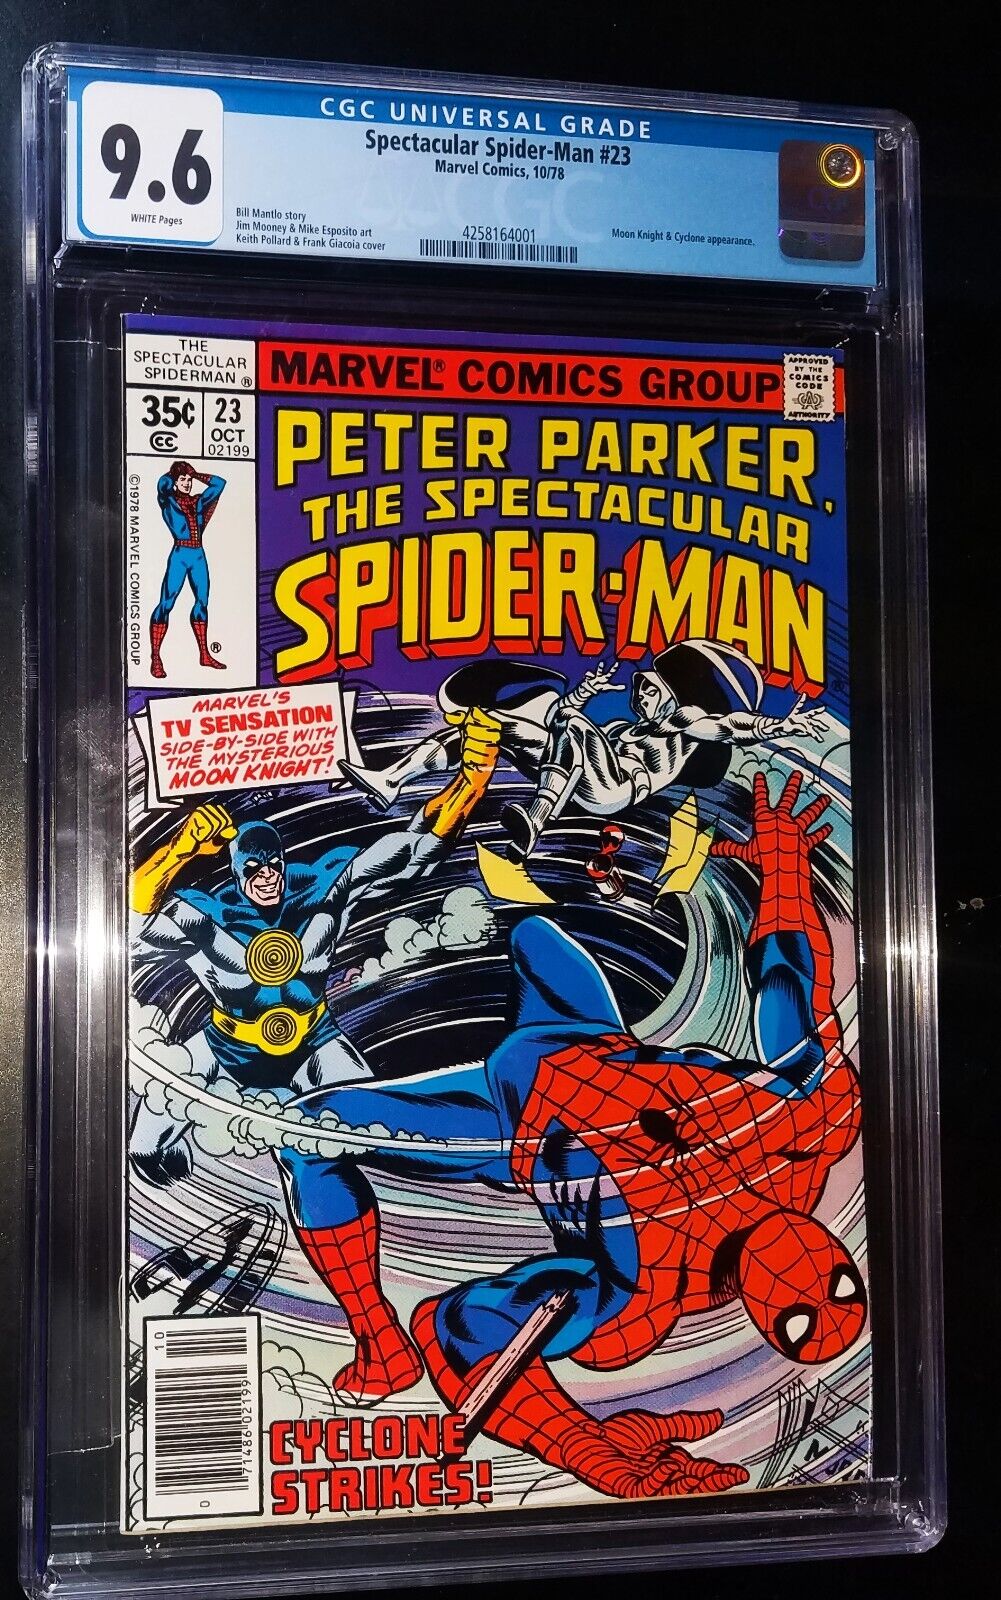 SPECTACULAR SPIDER-MAN #23 1978 Marvel Comics CGC 9.6 Near Mint + White Pages